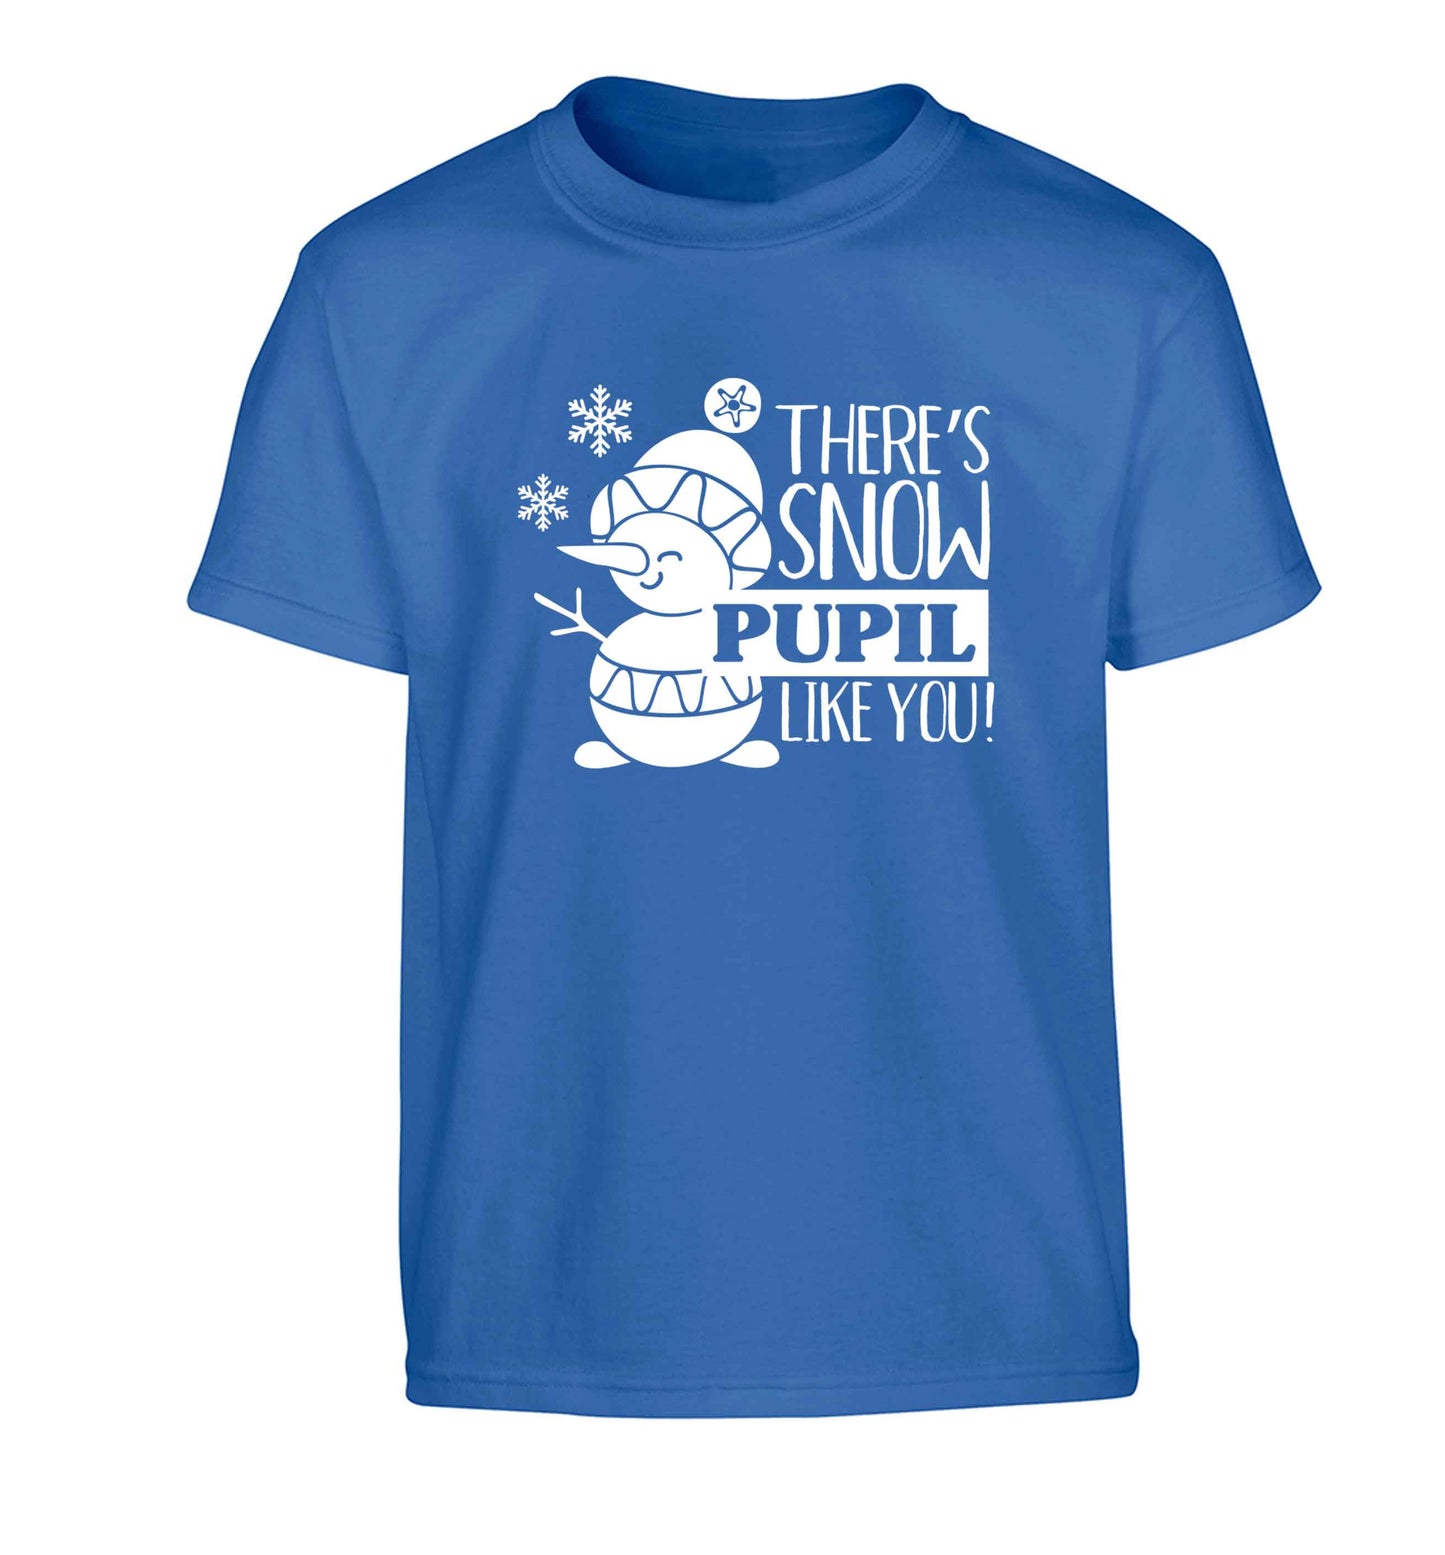 There's snow pupil like you Children's blue Tshirt 12-13 Years